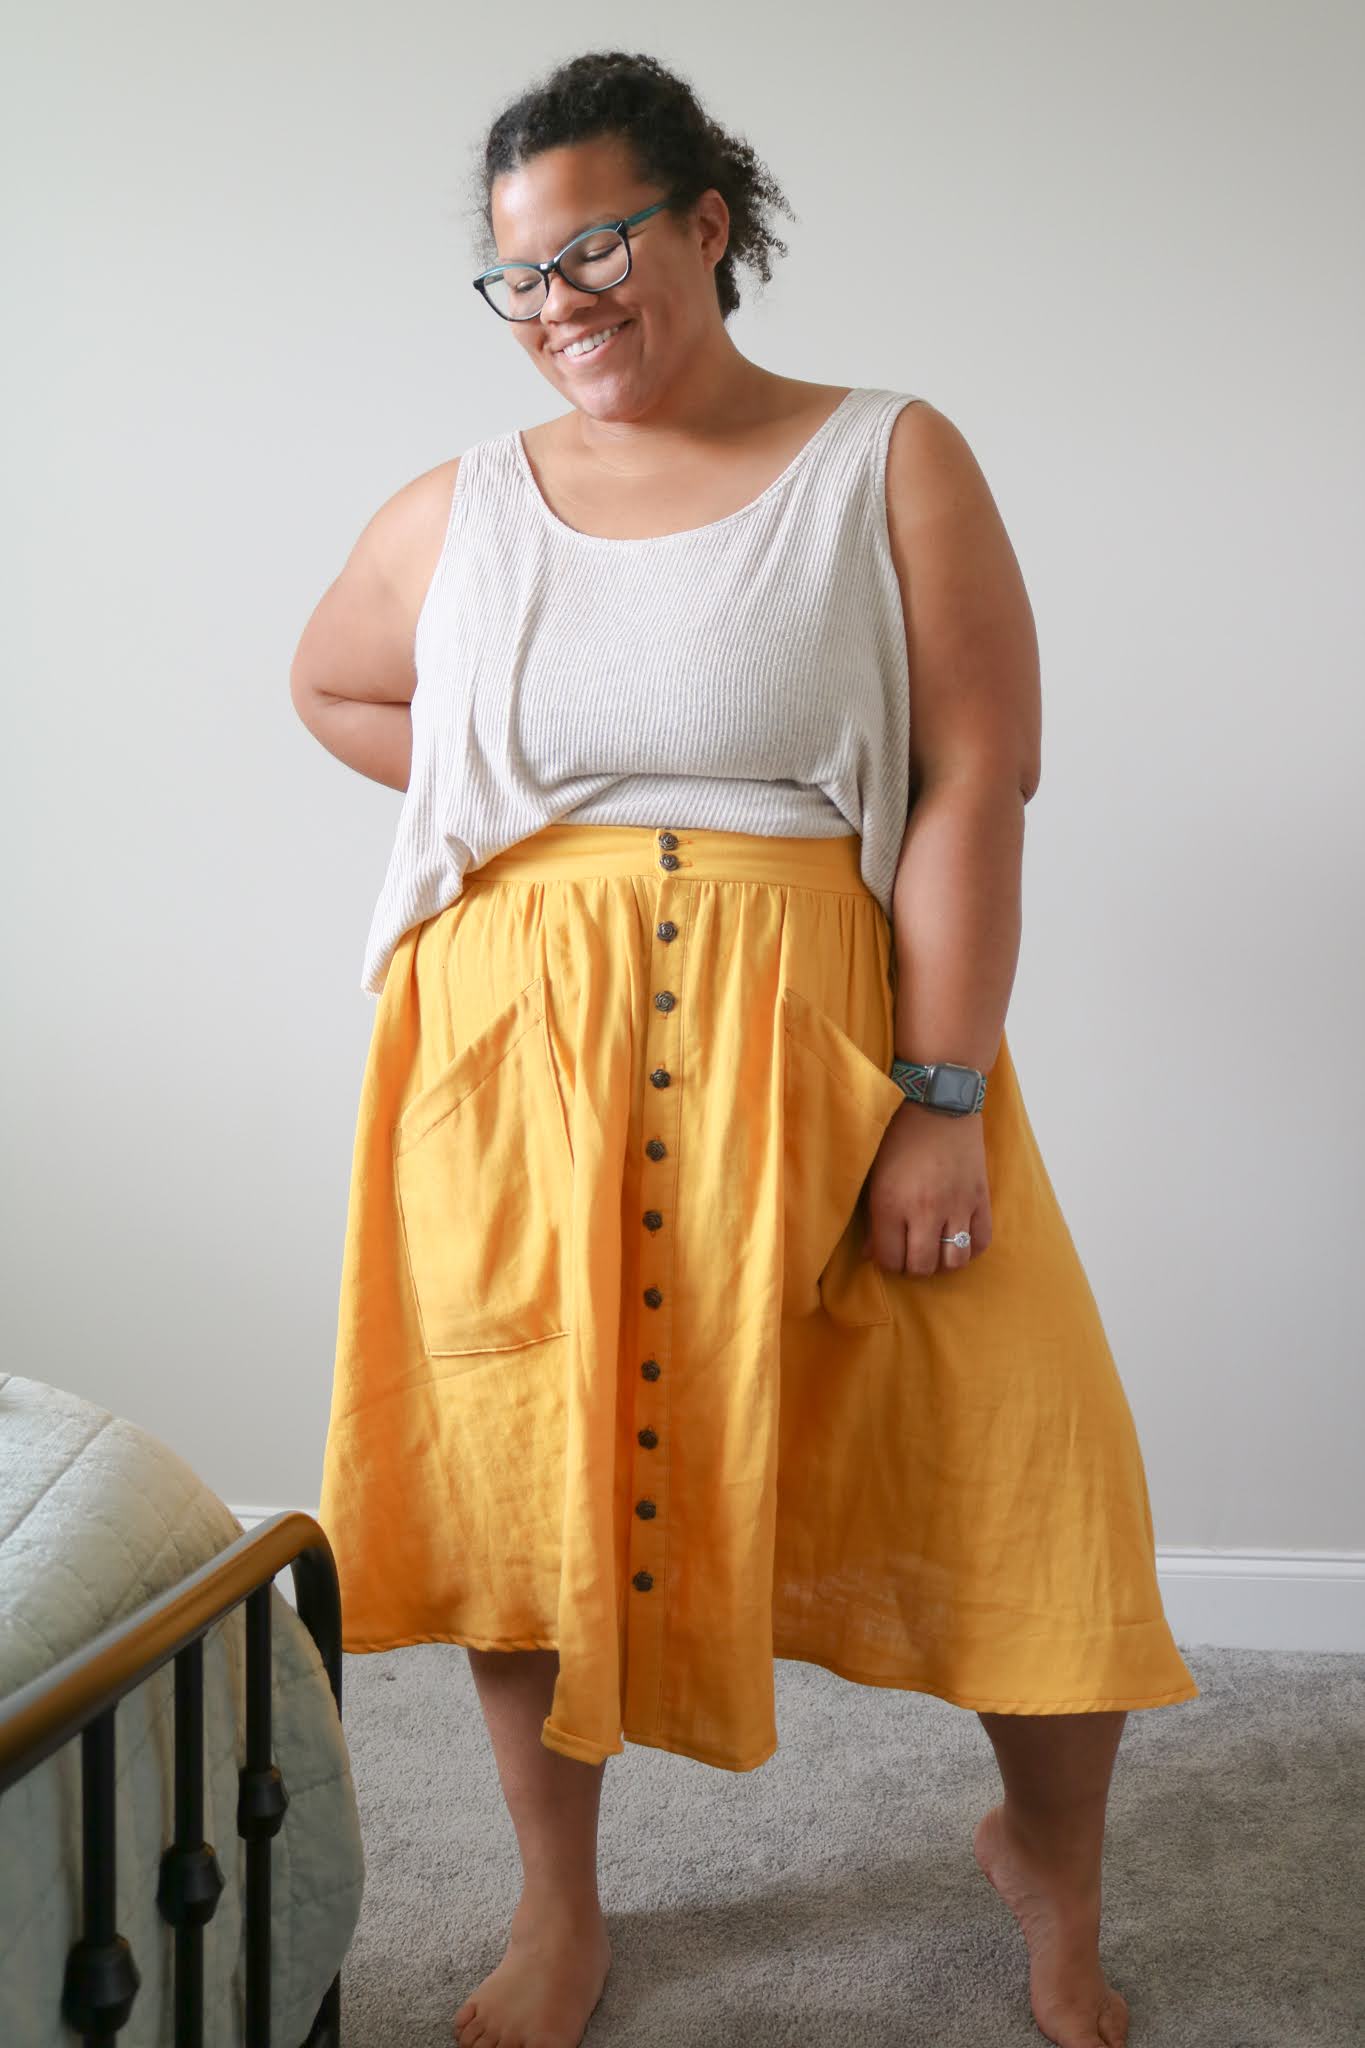 DIY Quick and Easy High Waisted Pencil Skirt - Beaute' J'adore